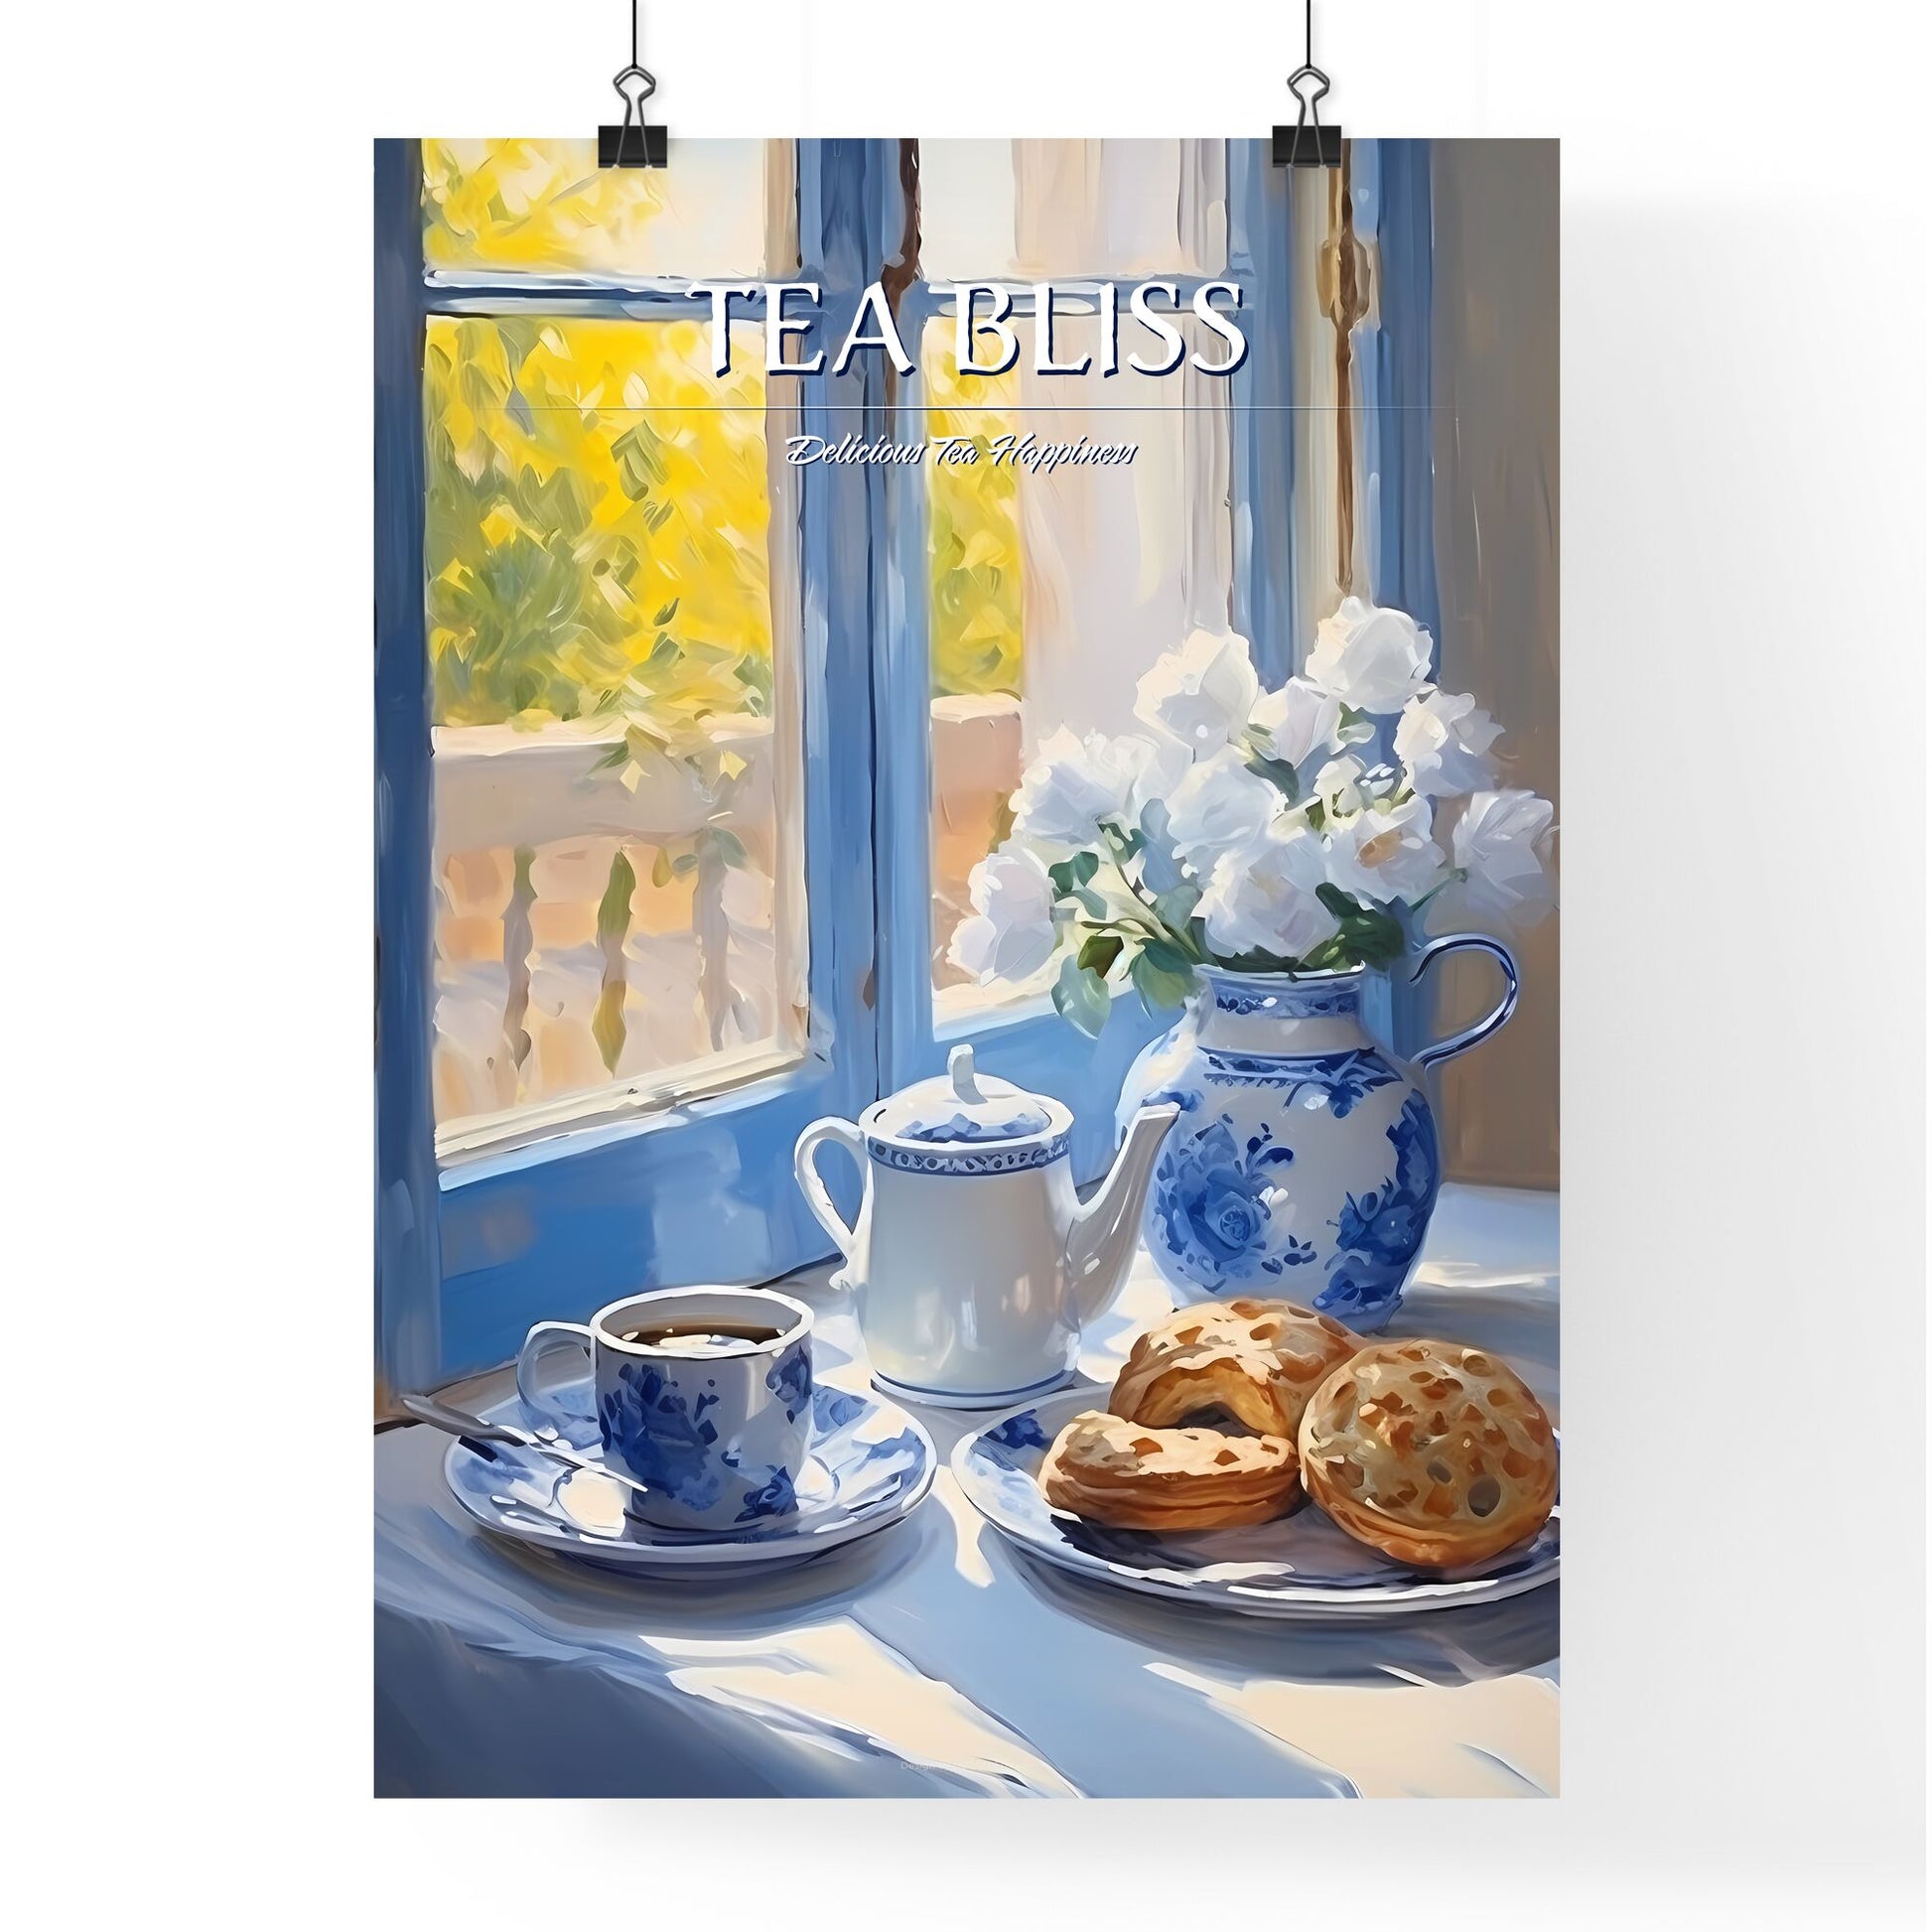 Tea Set With Cookies And Teapot On A Table Art Print Default Title